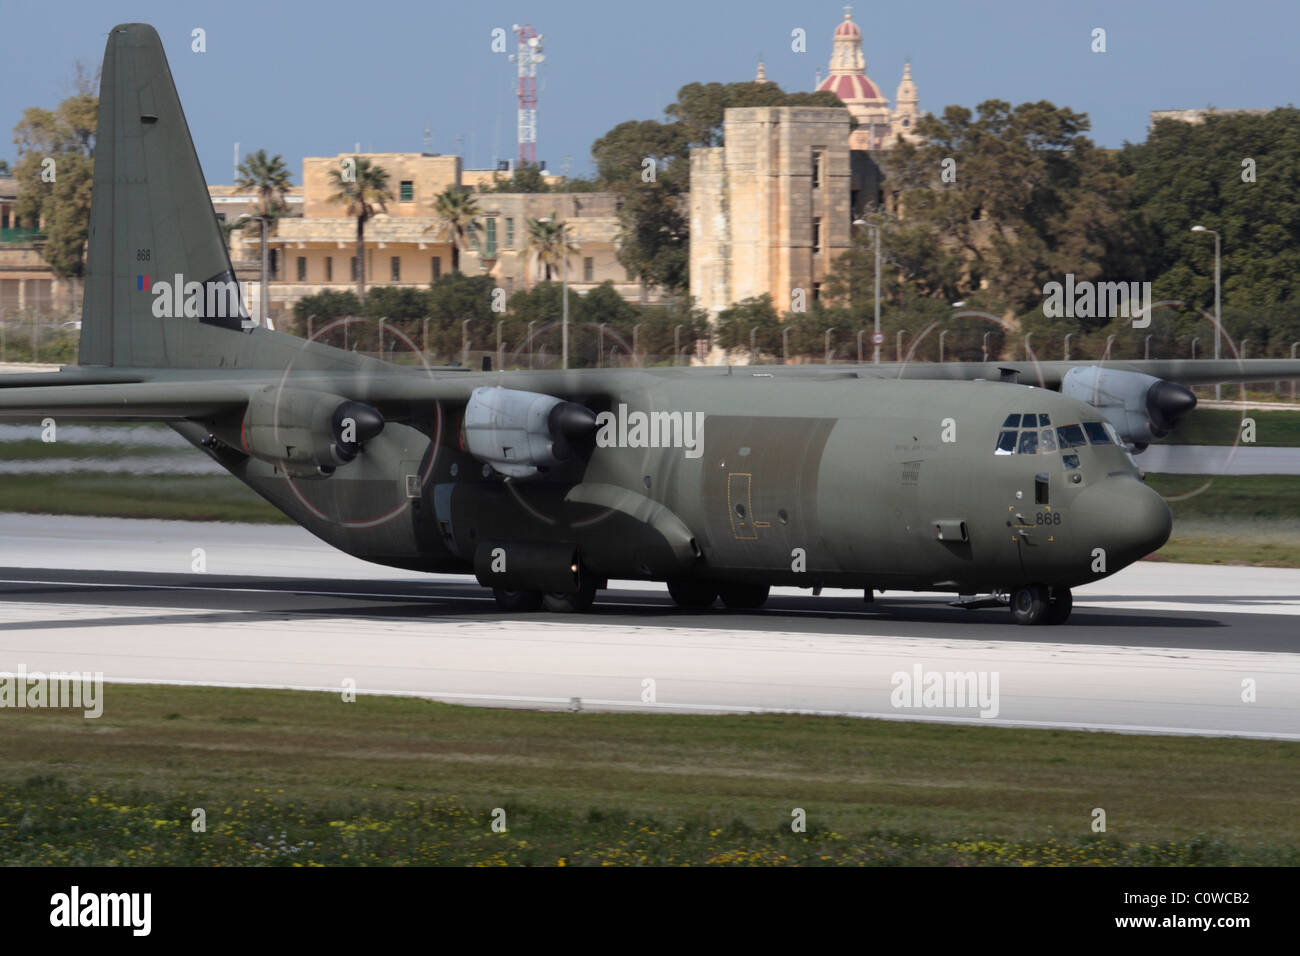 RAF C-130J Hercules taxiing on the runway in Malta during the Libyan crisis, 27 February 2011 Stock Photo